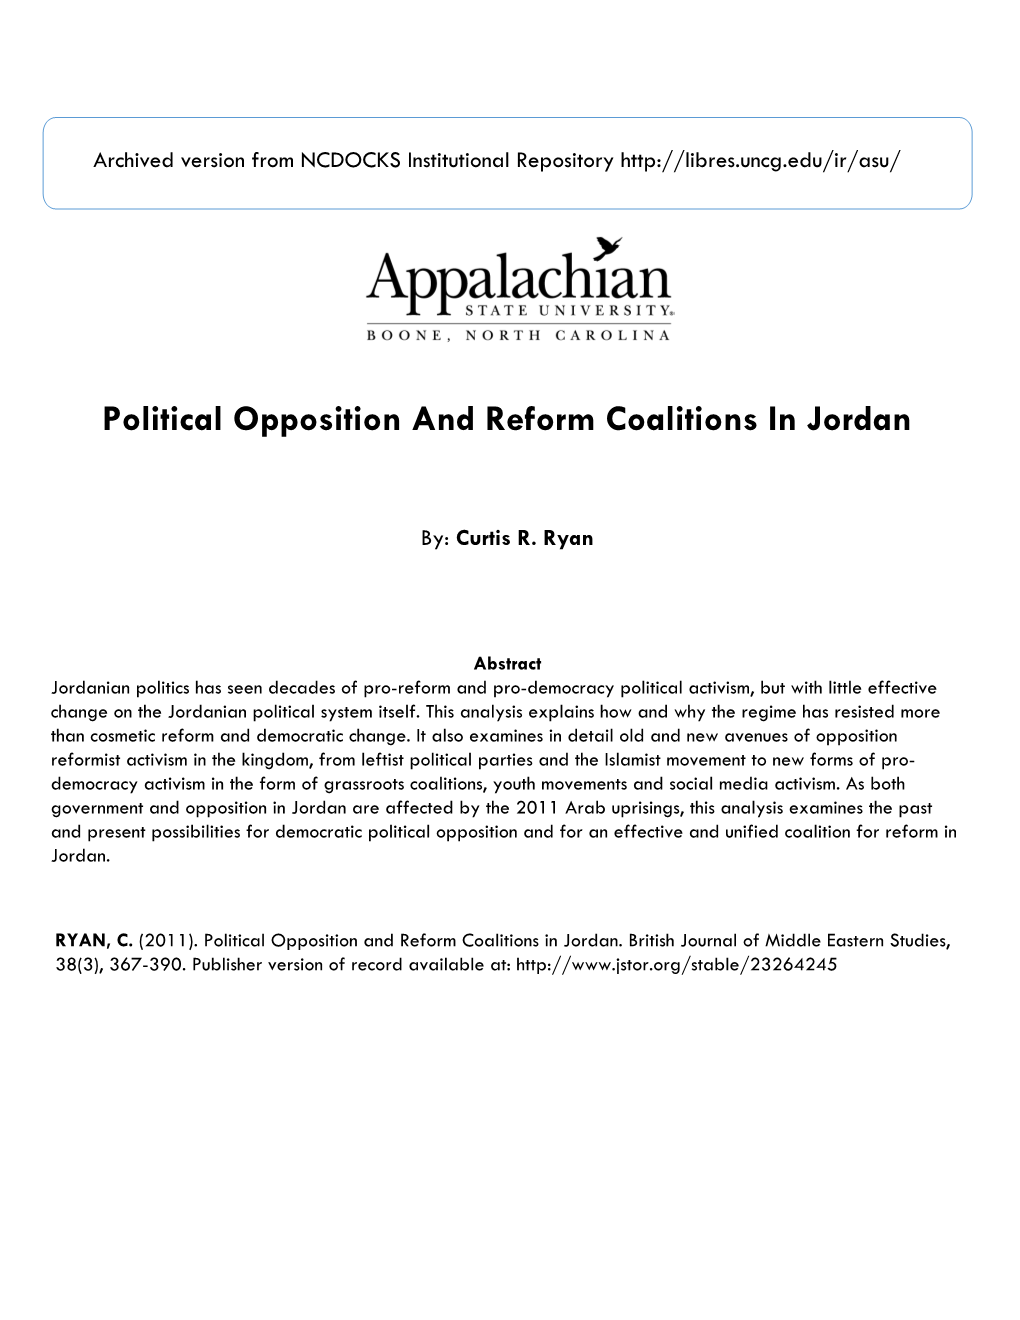 Political Opposition and Reform Coalitions in Jordan